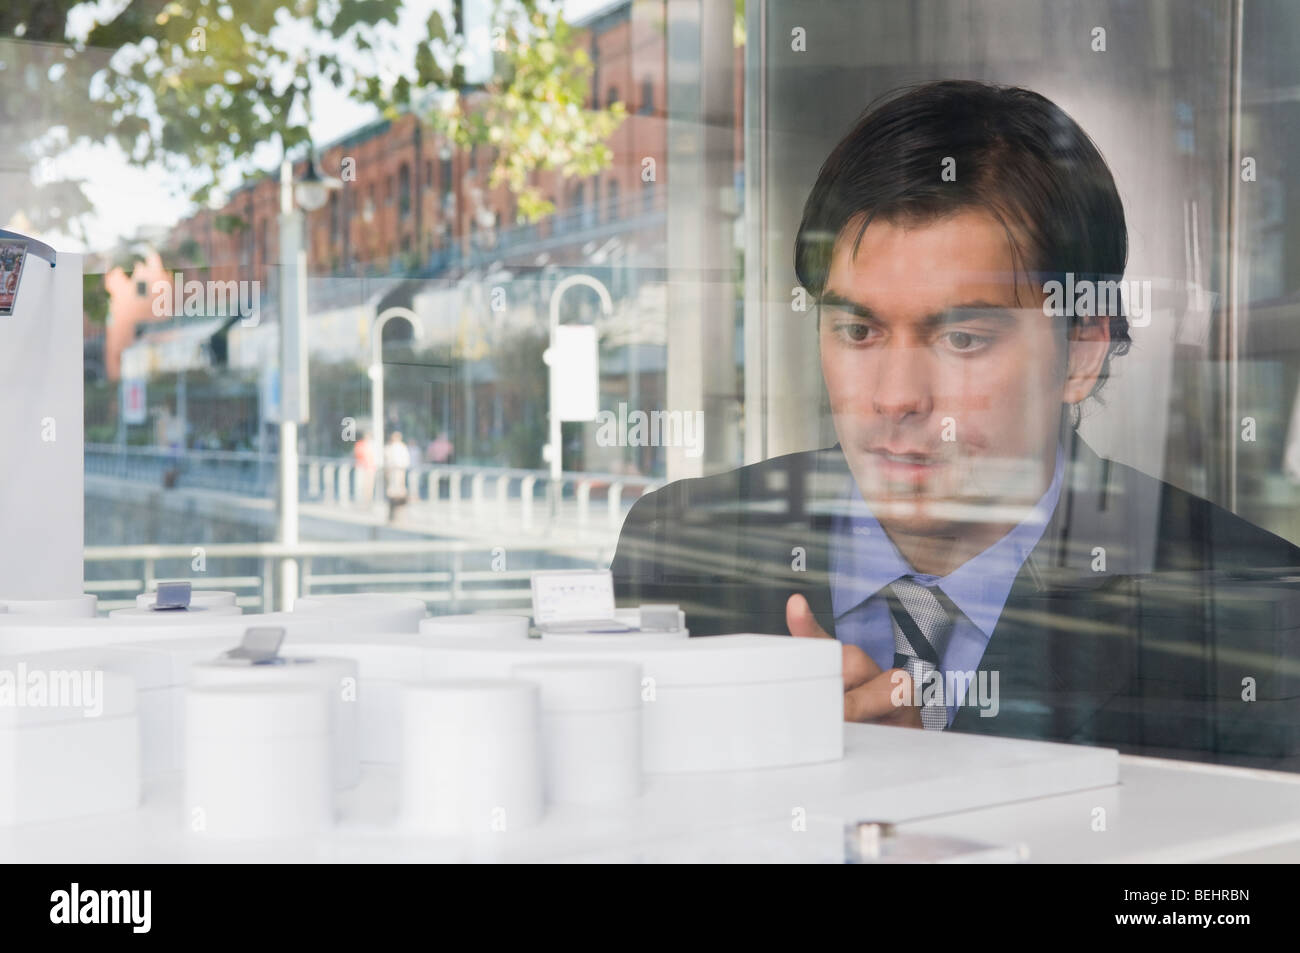 Businessman looking at an architectural model Stock Photo